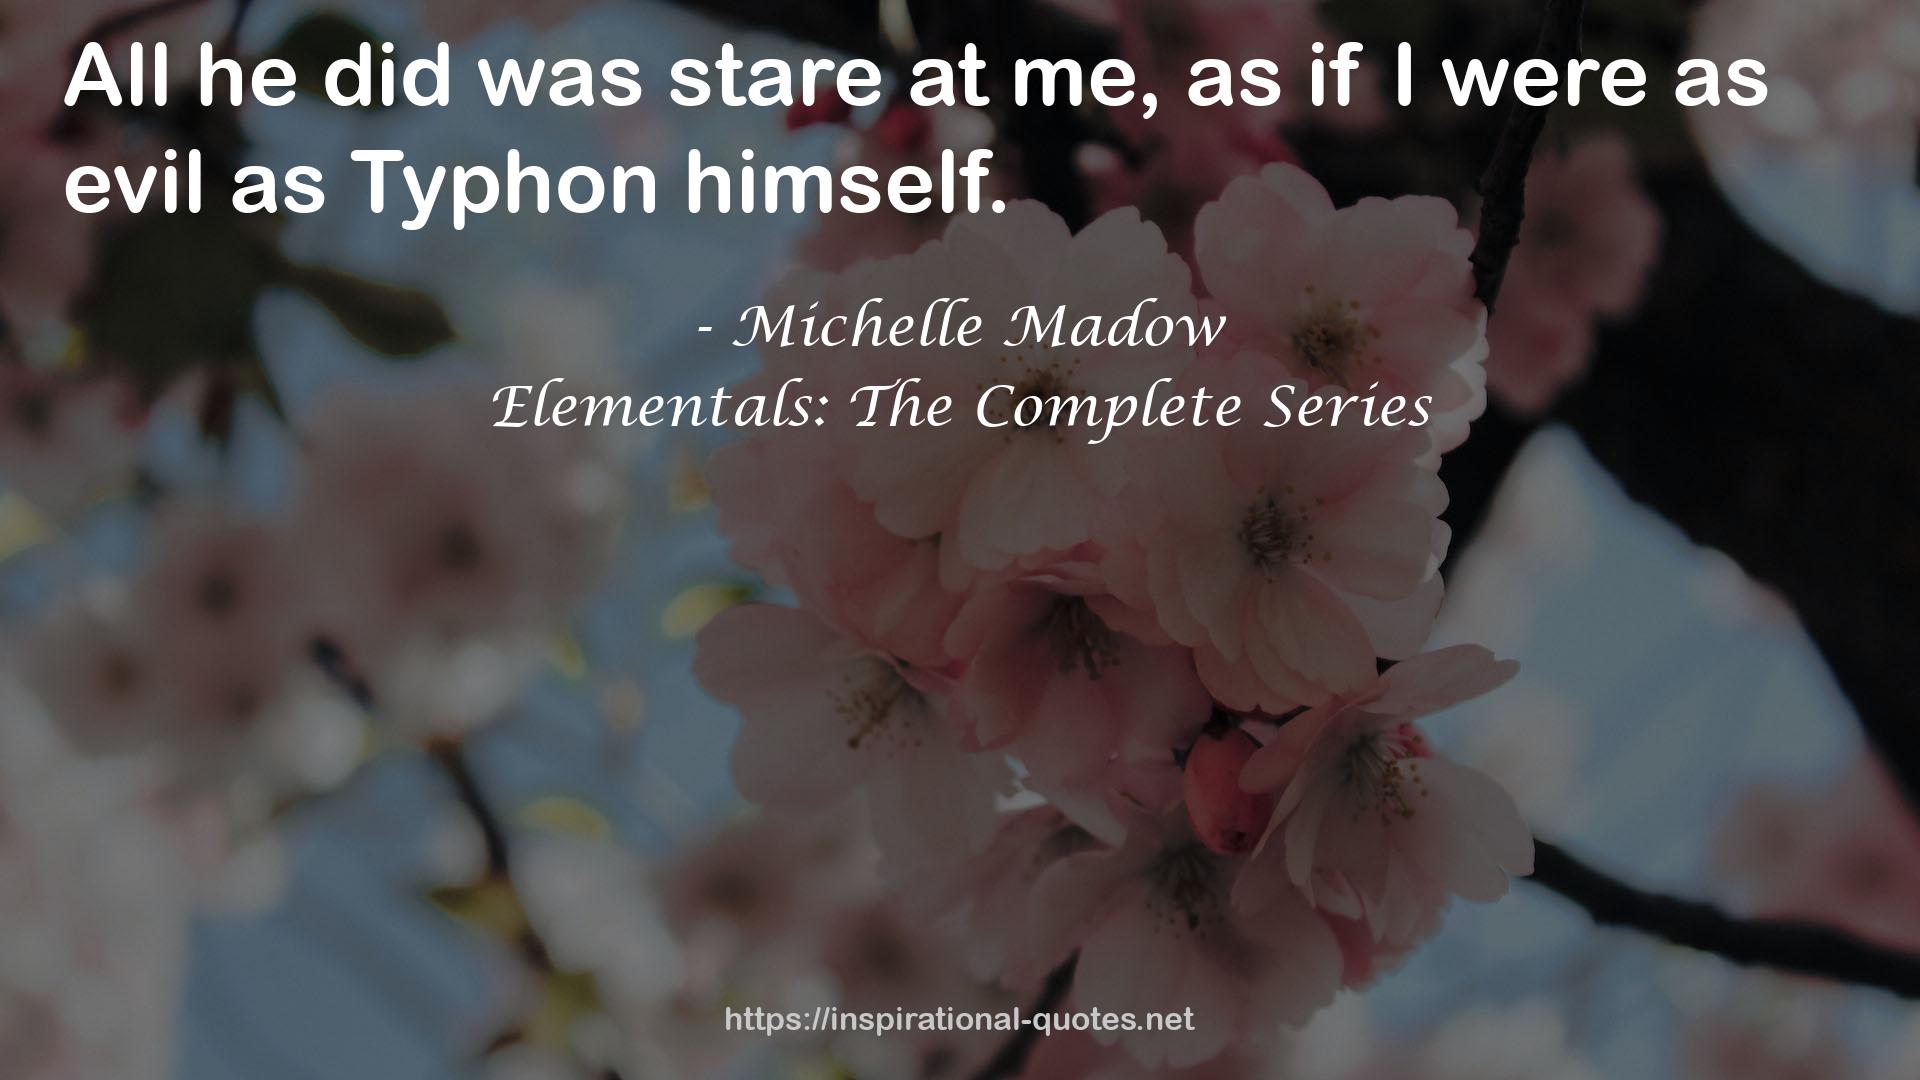 Michelle Madow QUOTES